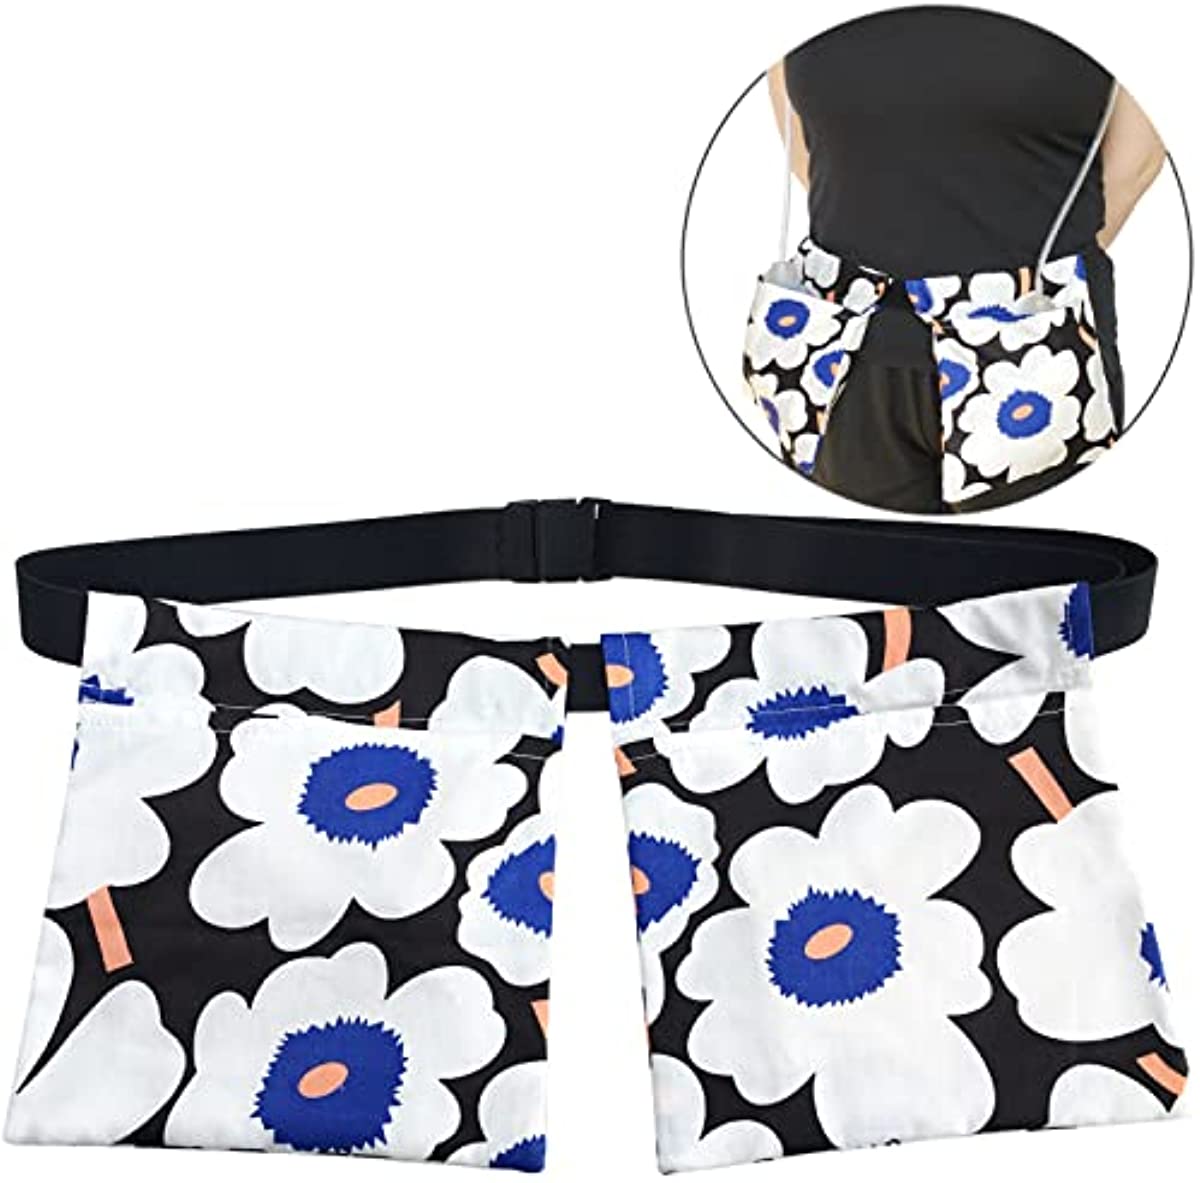 HapiPoppy Mastectomy Drainage Pouch Adjustable Drain Belt Floral Print Holder for JP Bulbs Breast Cancer Post Surgery Reconstruction Abdominal Tummy Tuck Recovery Surgical Support Pocket (Poppy Black)